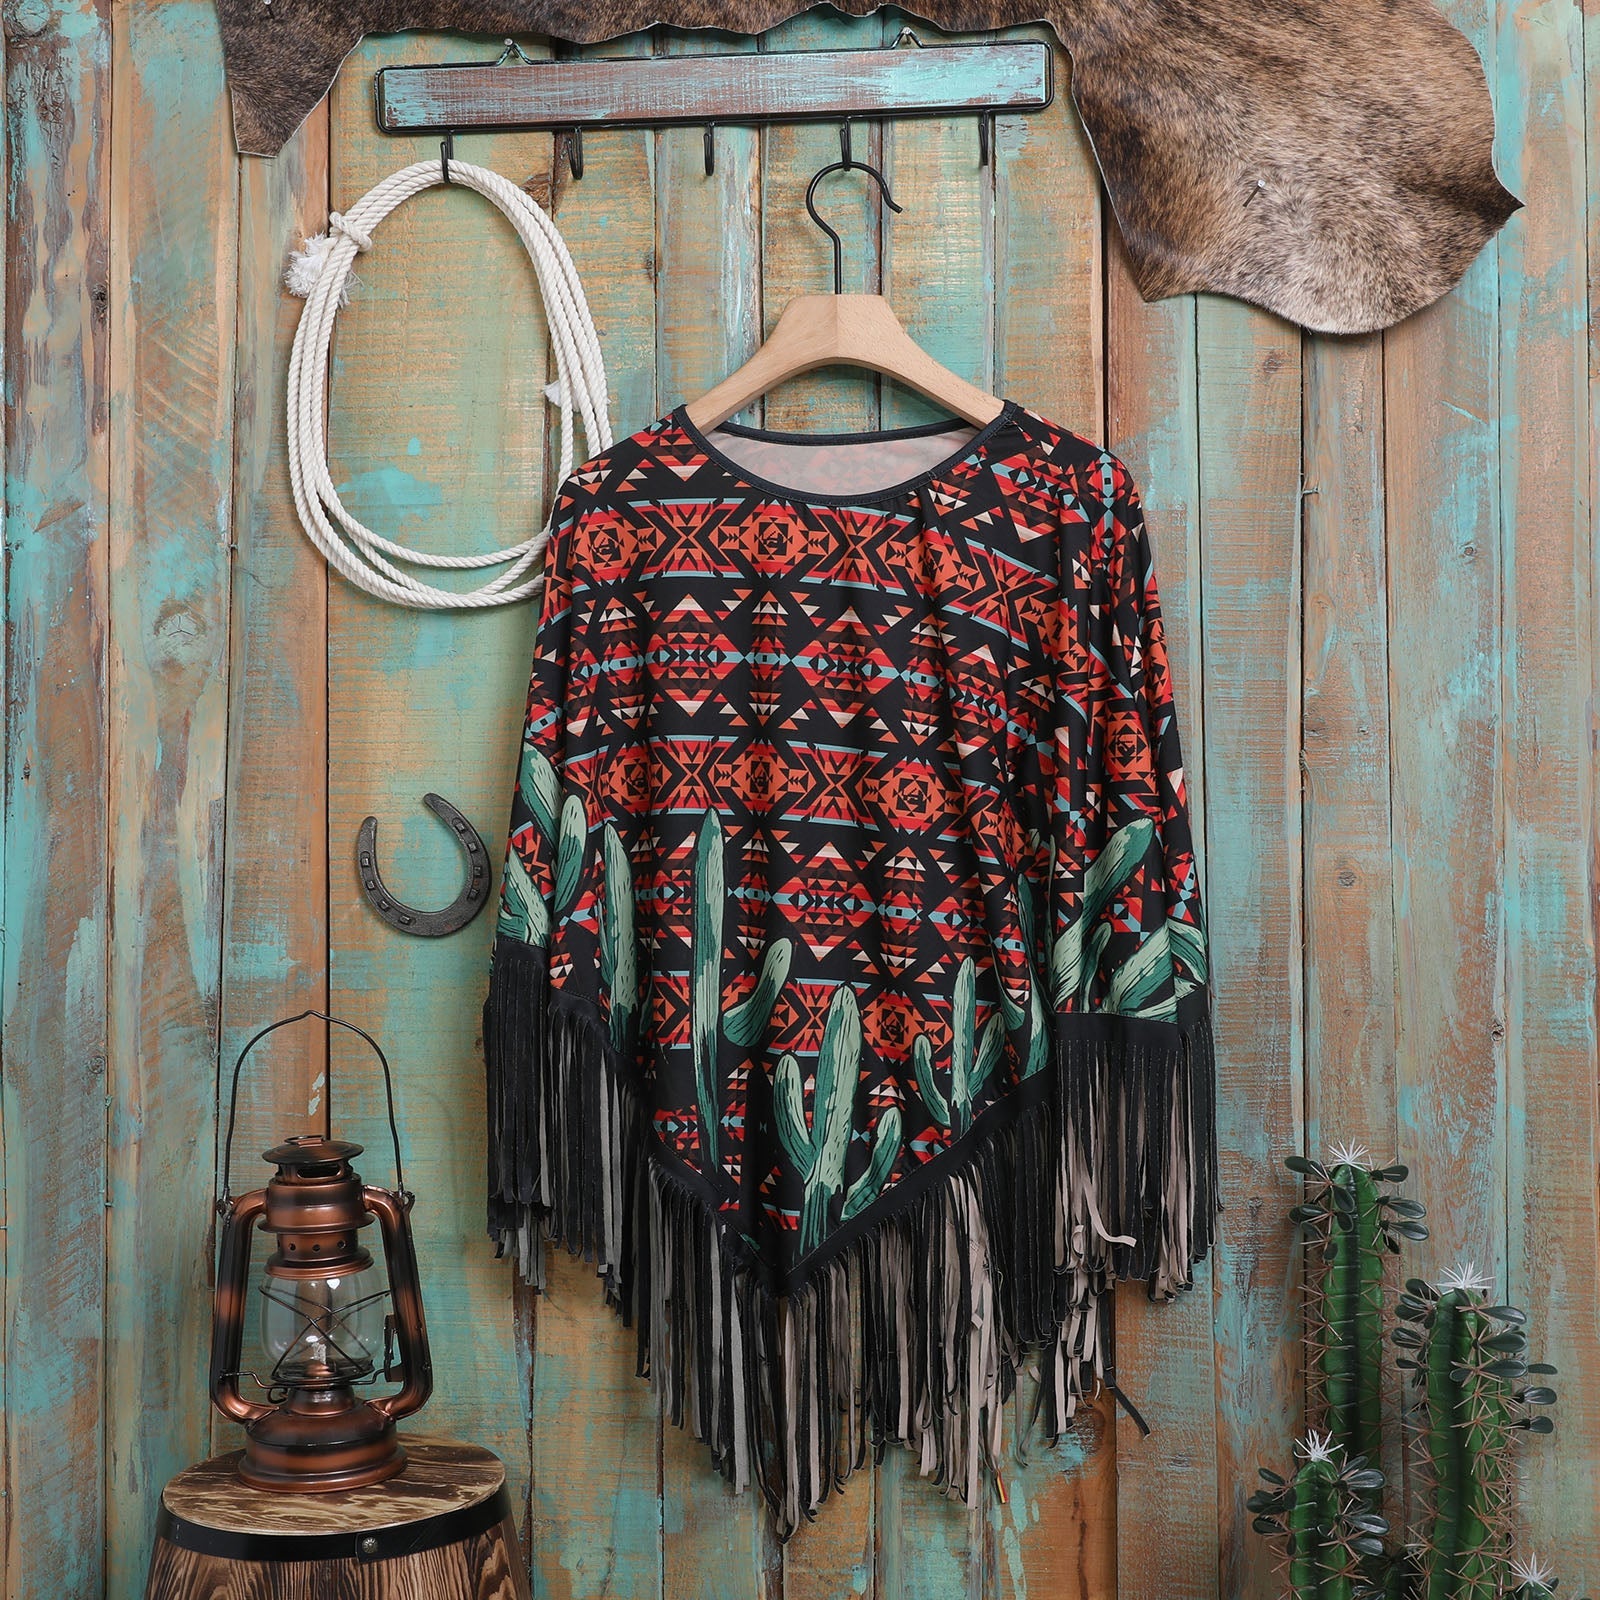 Montana West Cactus Collection Poncho - Cowgirl Wear